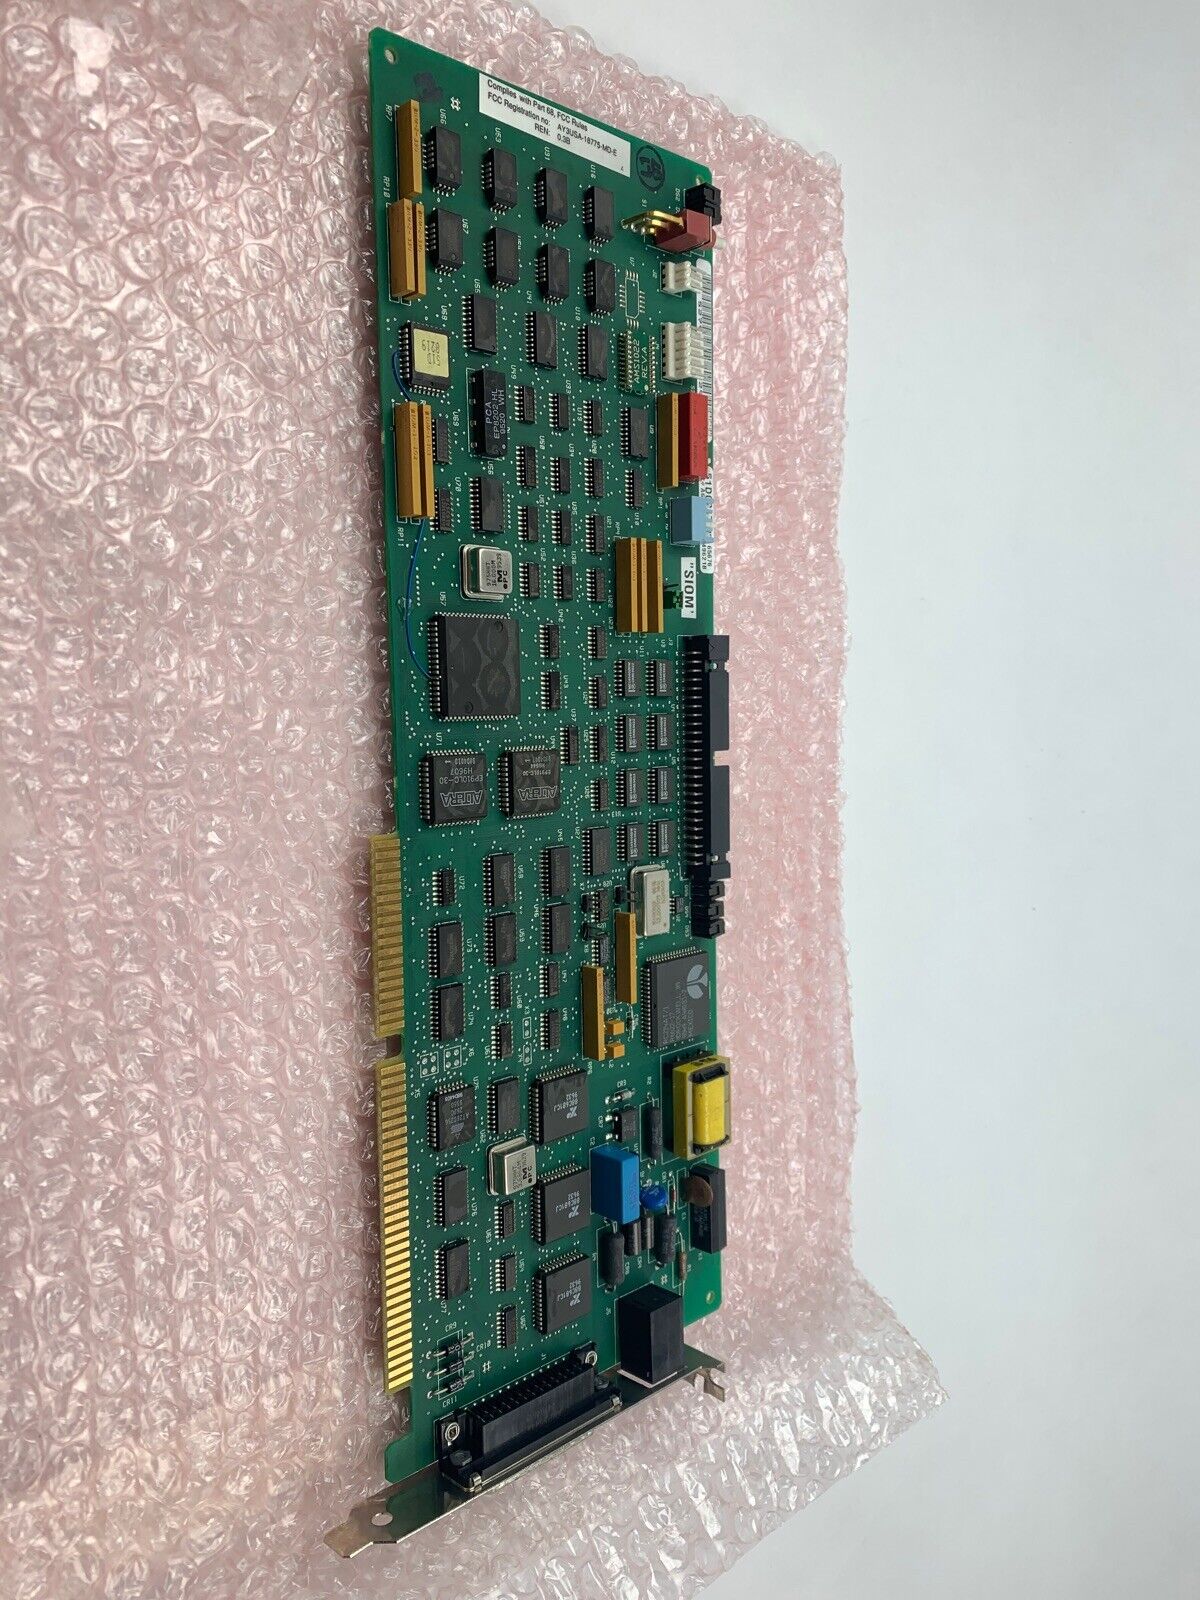 Rolm Phonemail  PHML 51D0217 Serial I/O Modem SIOM Circuit Card S27970340229